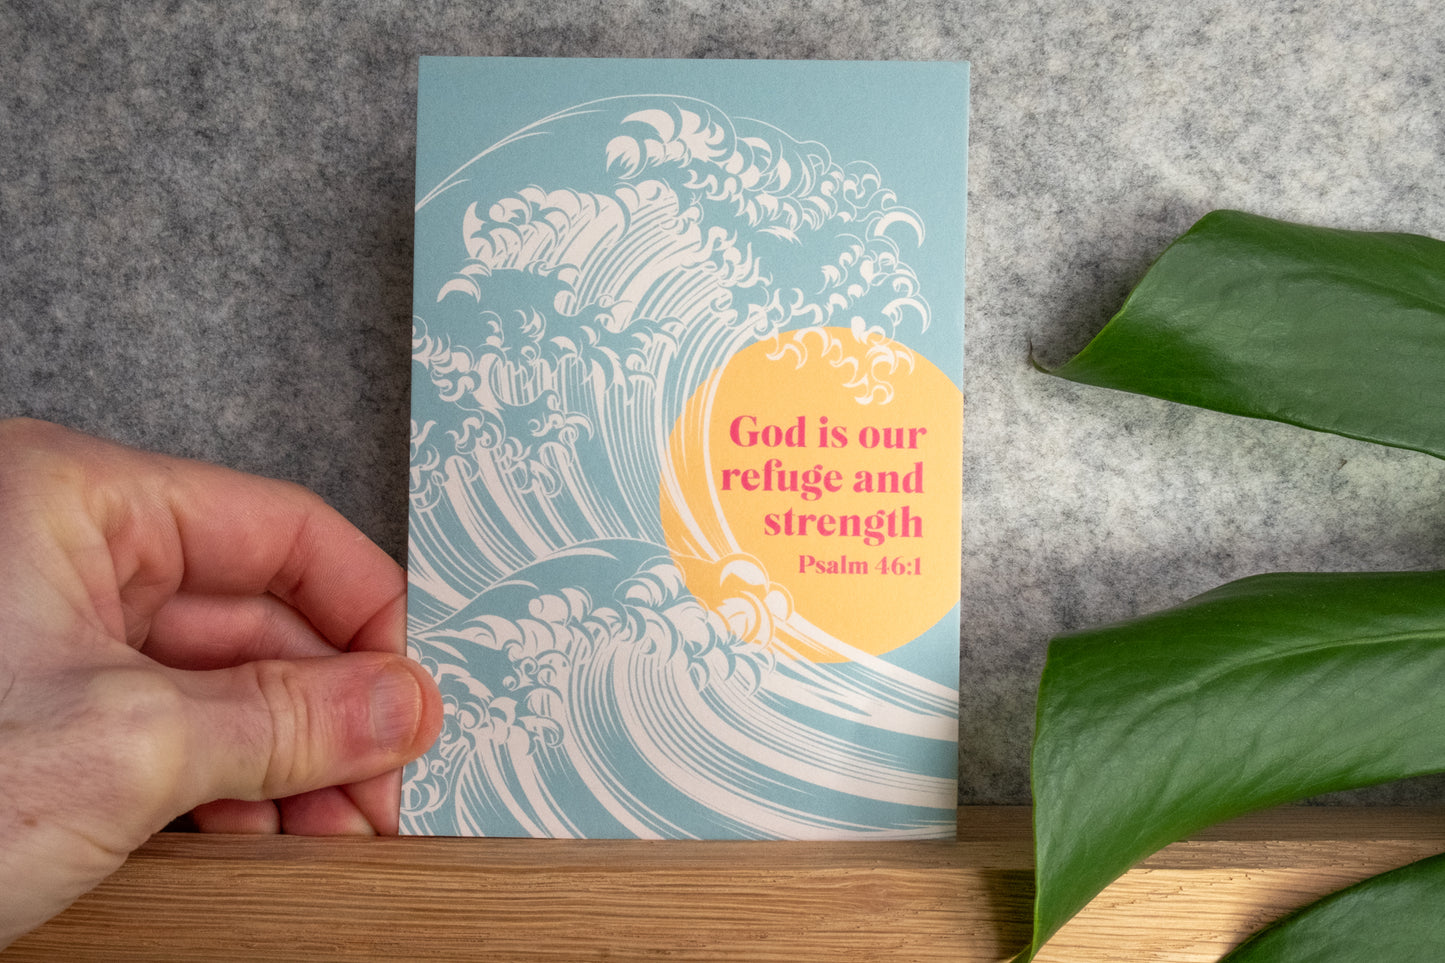 Set of Christian Postcards. 'God is our refuge and strength" - Psalm 46 verse 1